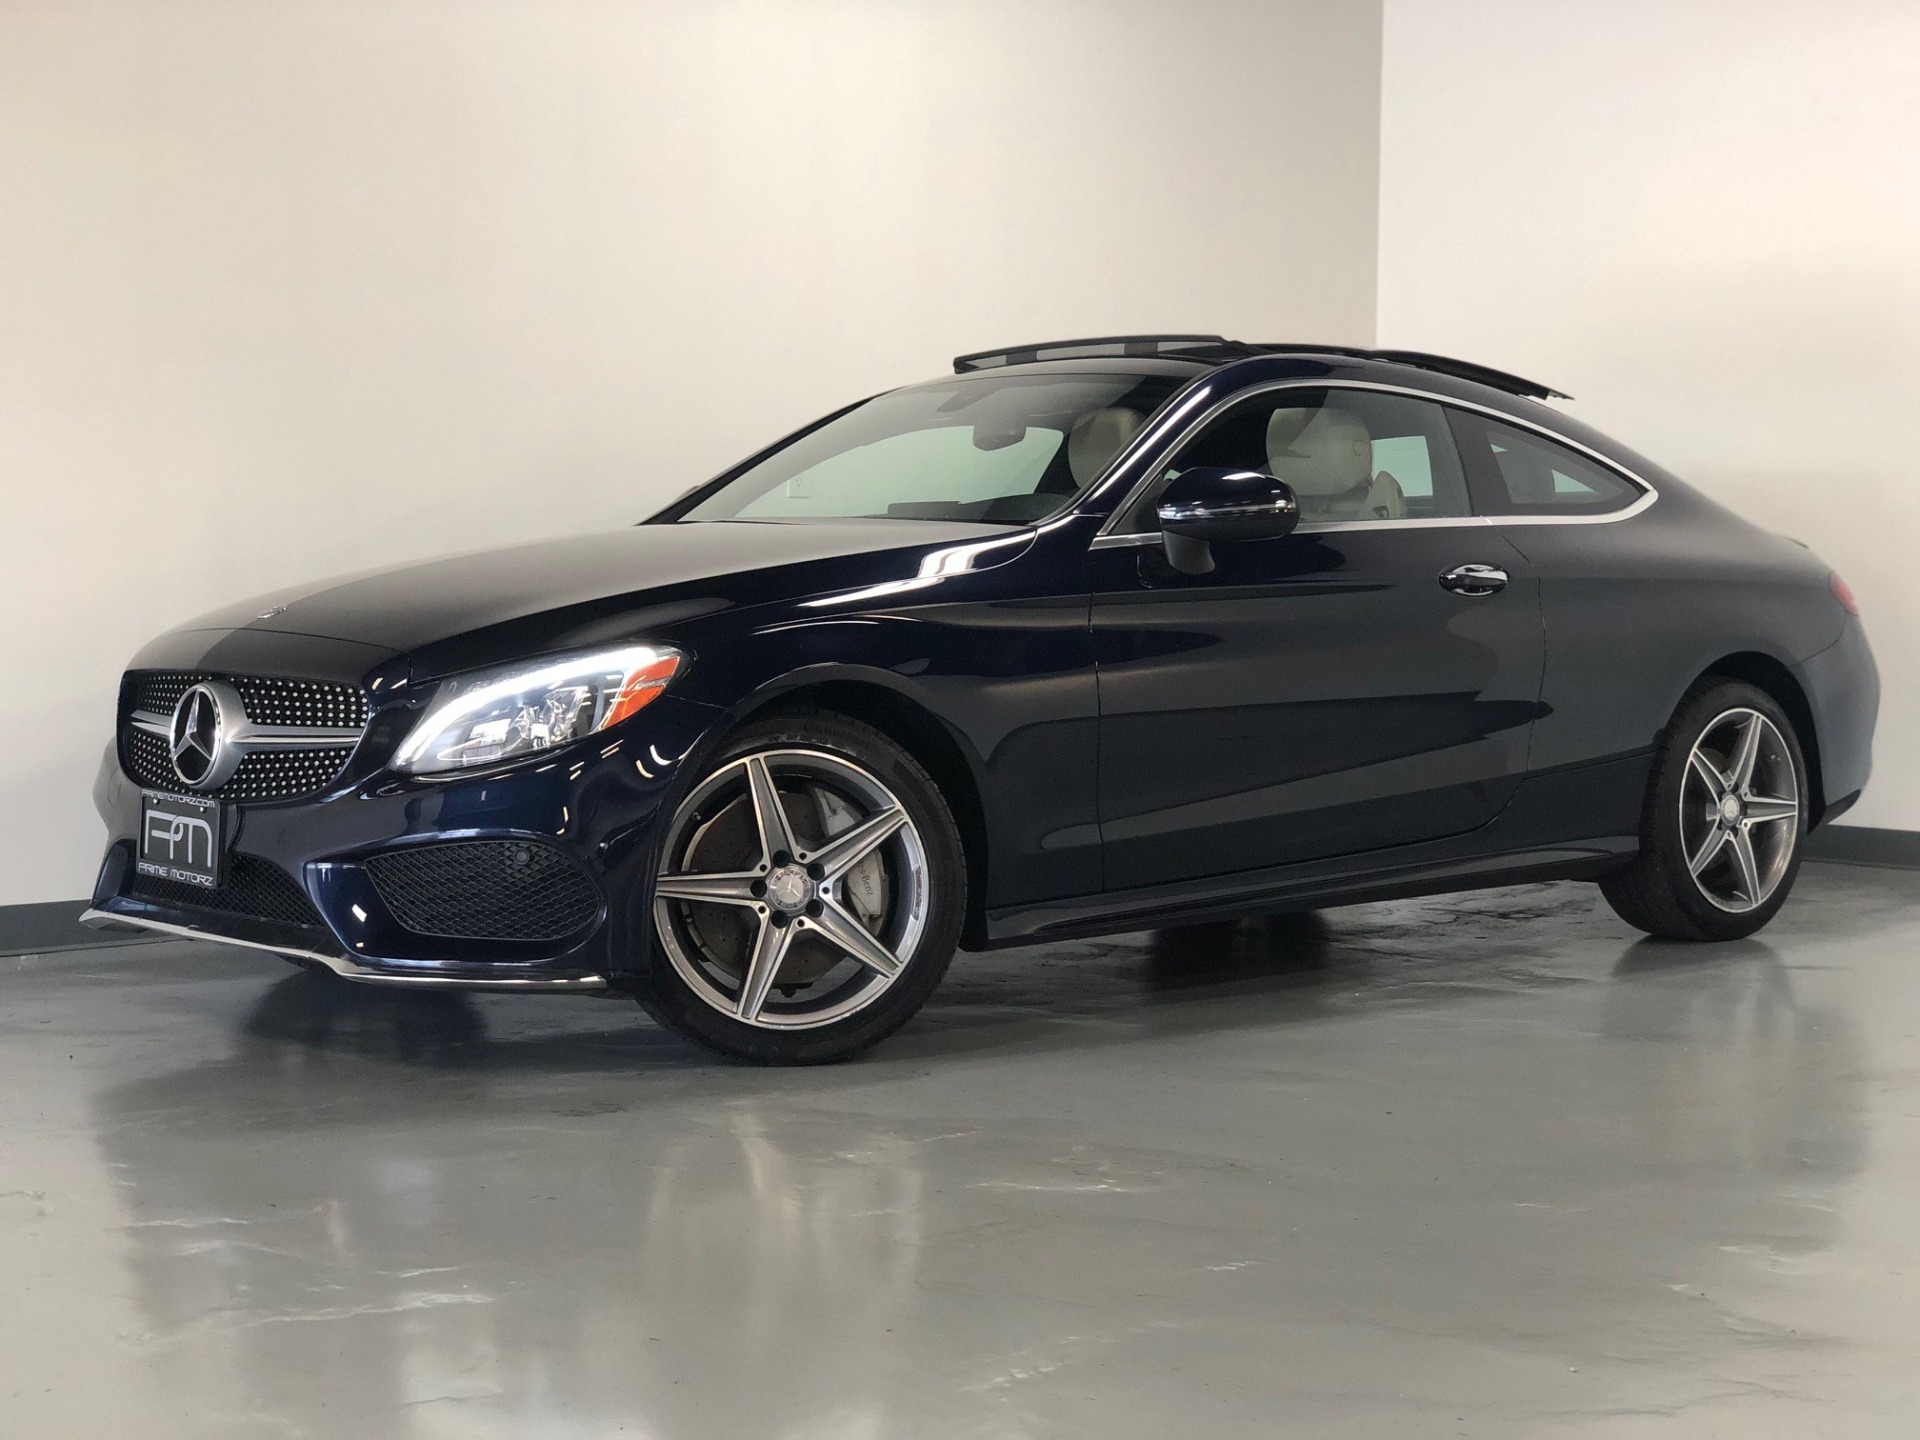 Used 2017 Brilliant Blue Metallic Mercedes Benz C Class Coupe C300 Awd C 300 4matic For Sale Sold Prime Motorz Stock 2825